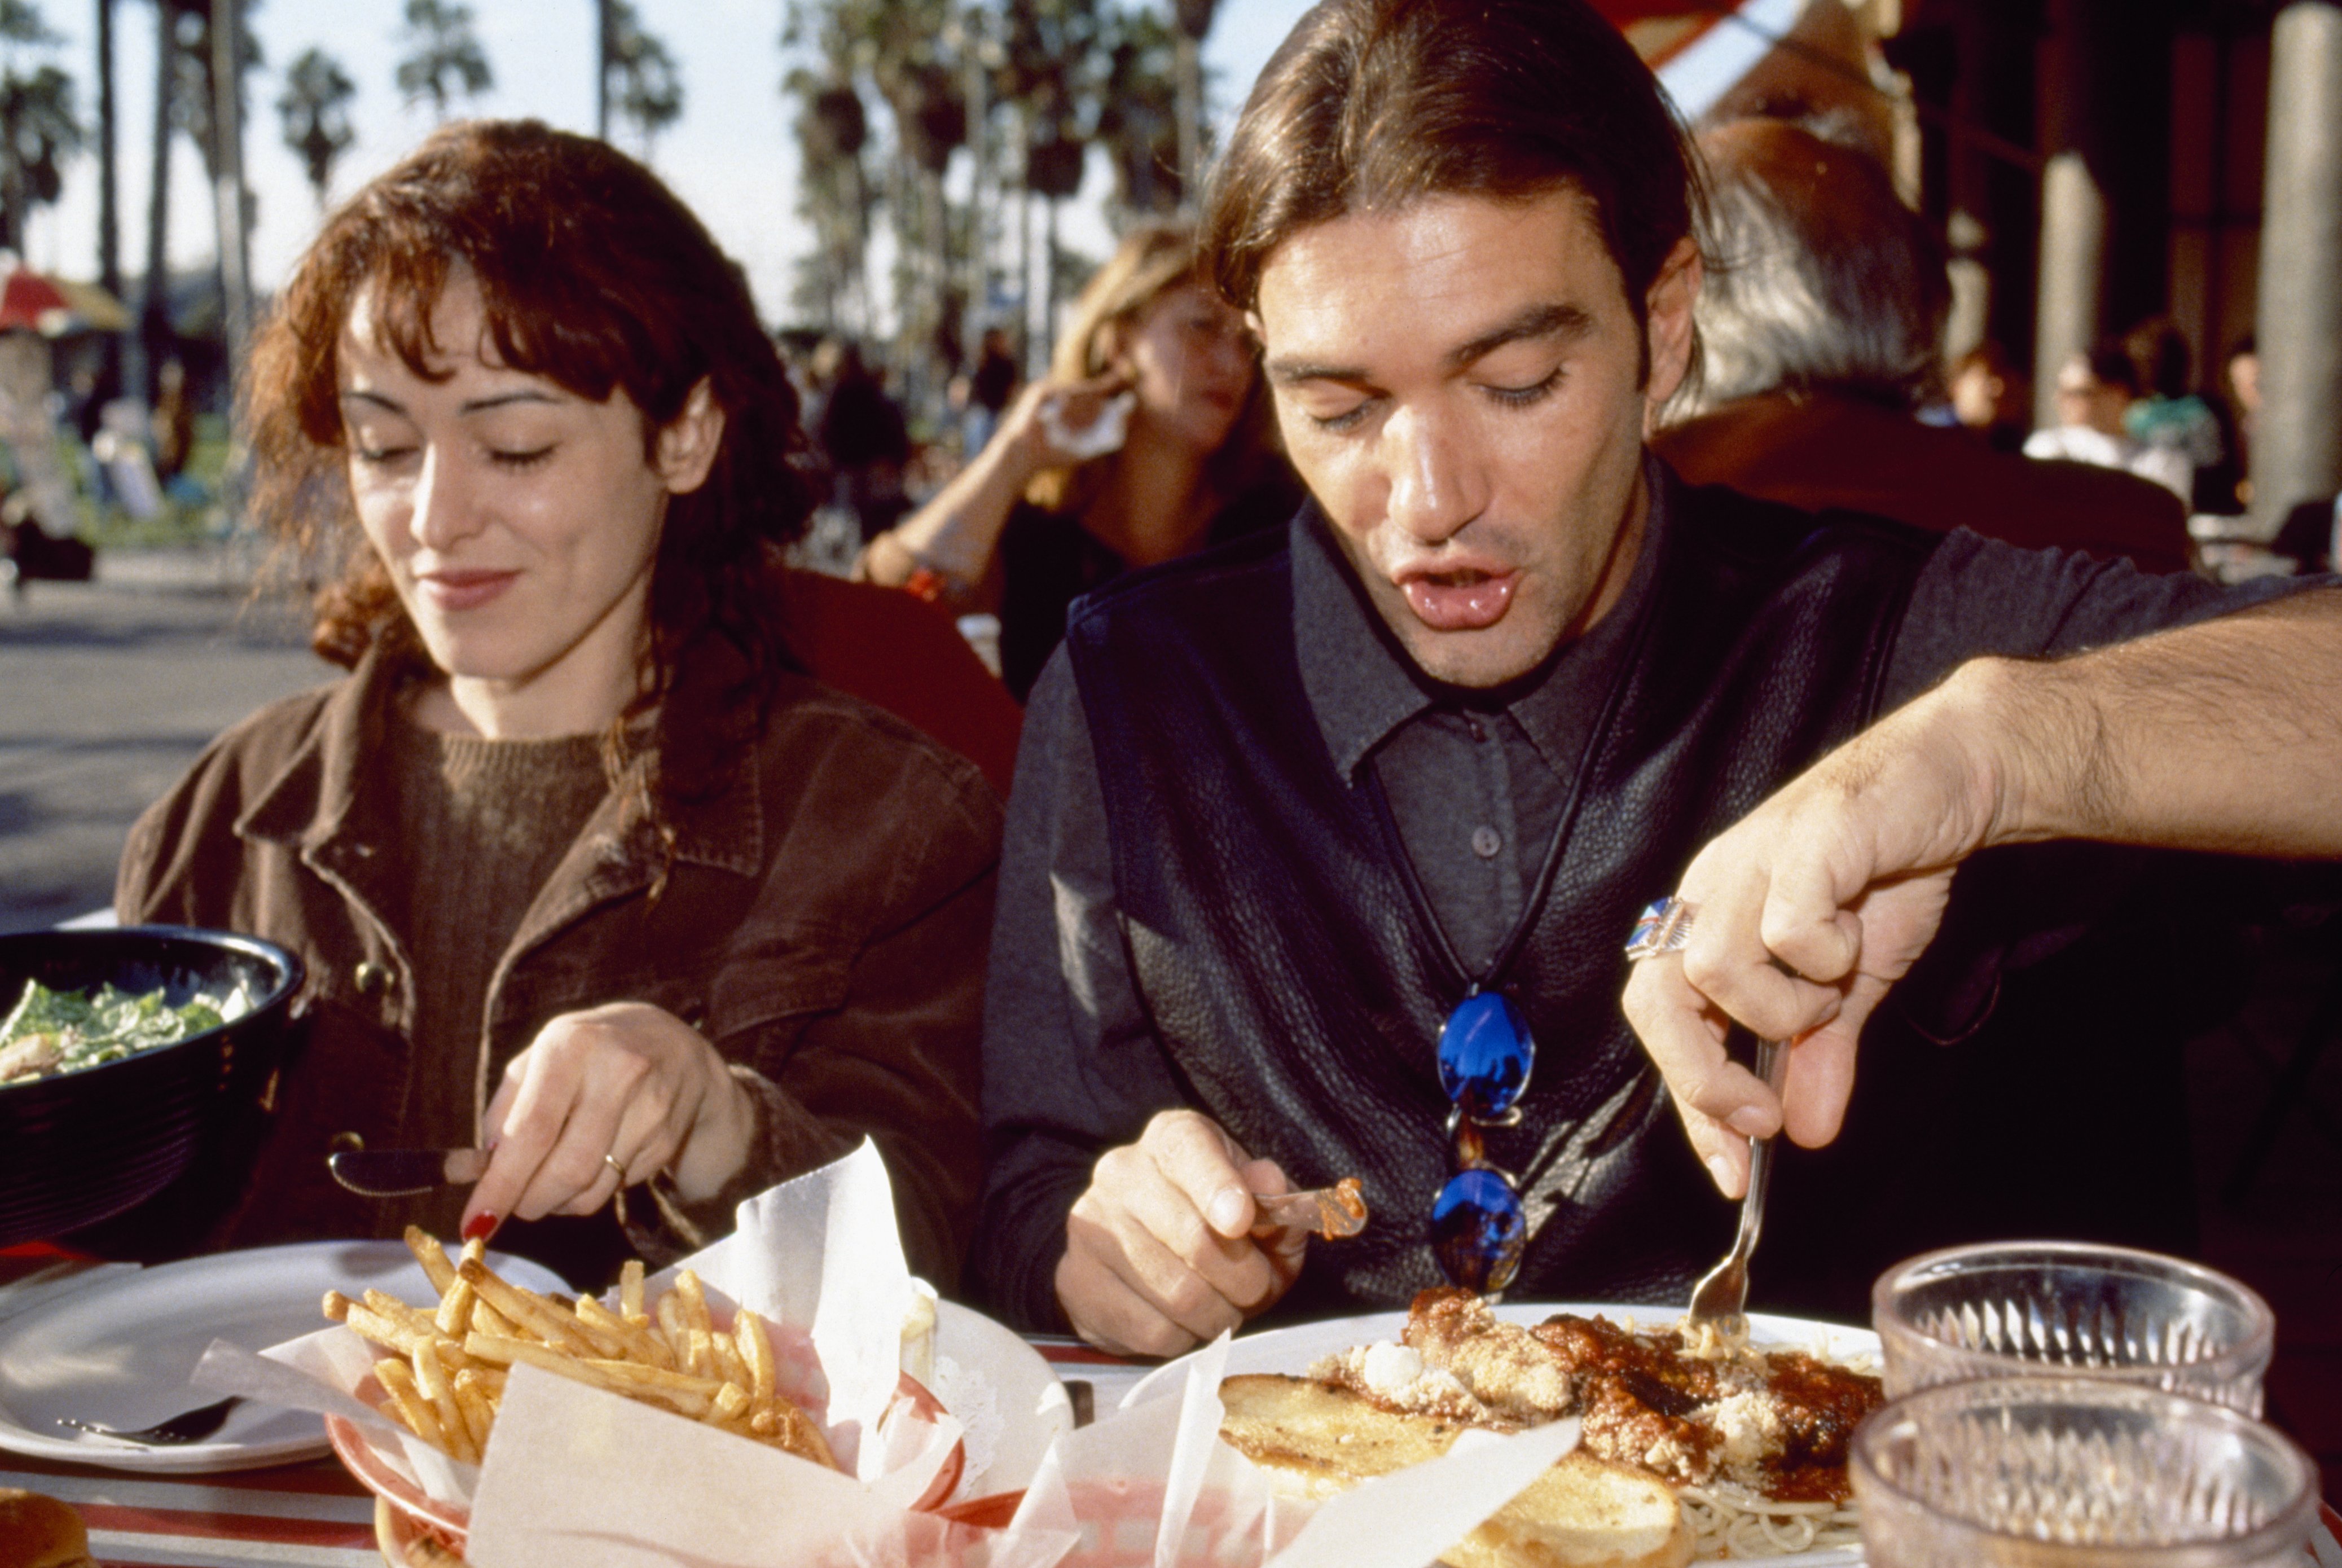  Antonio Banderas and Ana Leza enjoying a meal at an unspecified location, on an unspecified date | Source: Getty Images